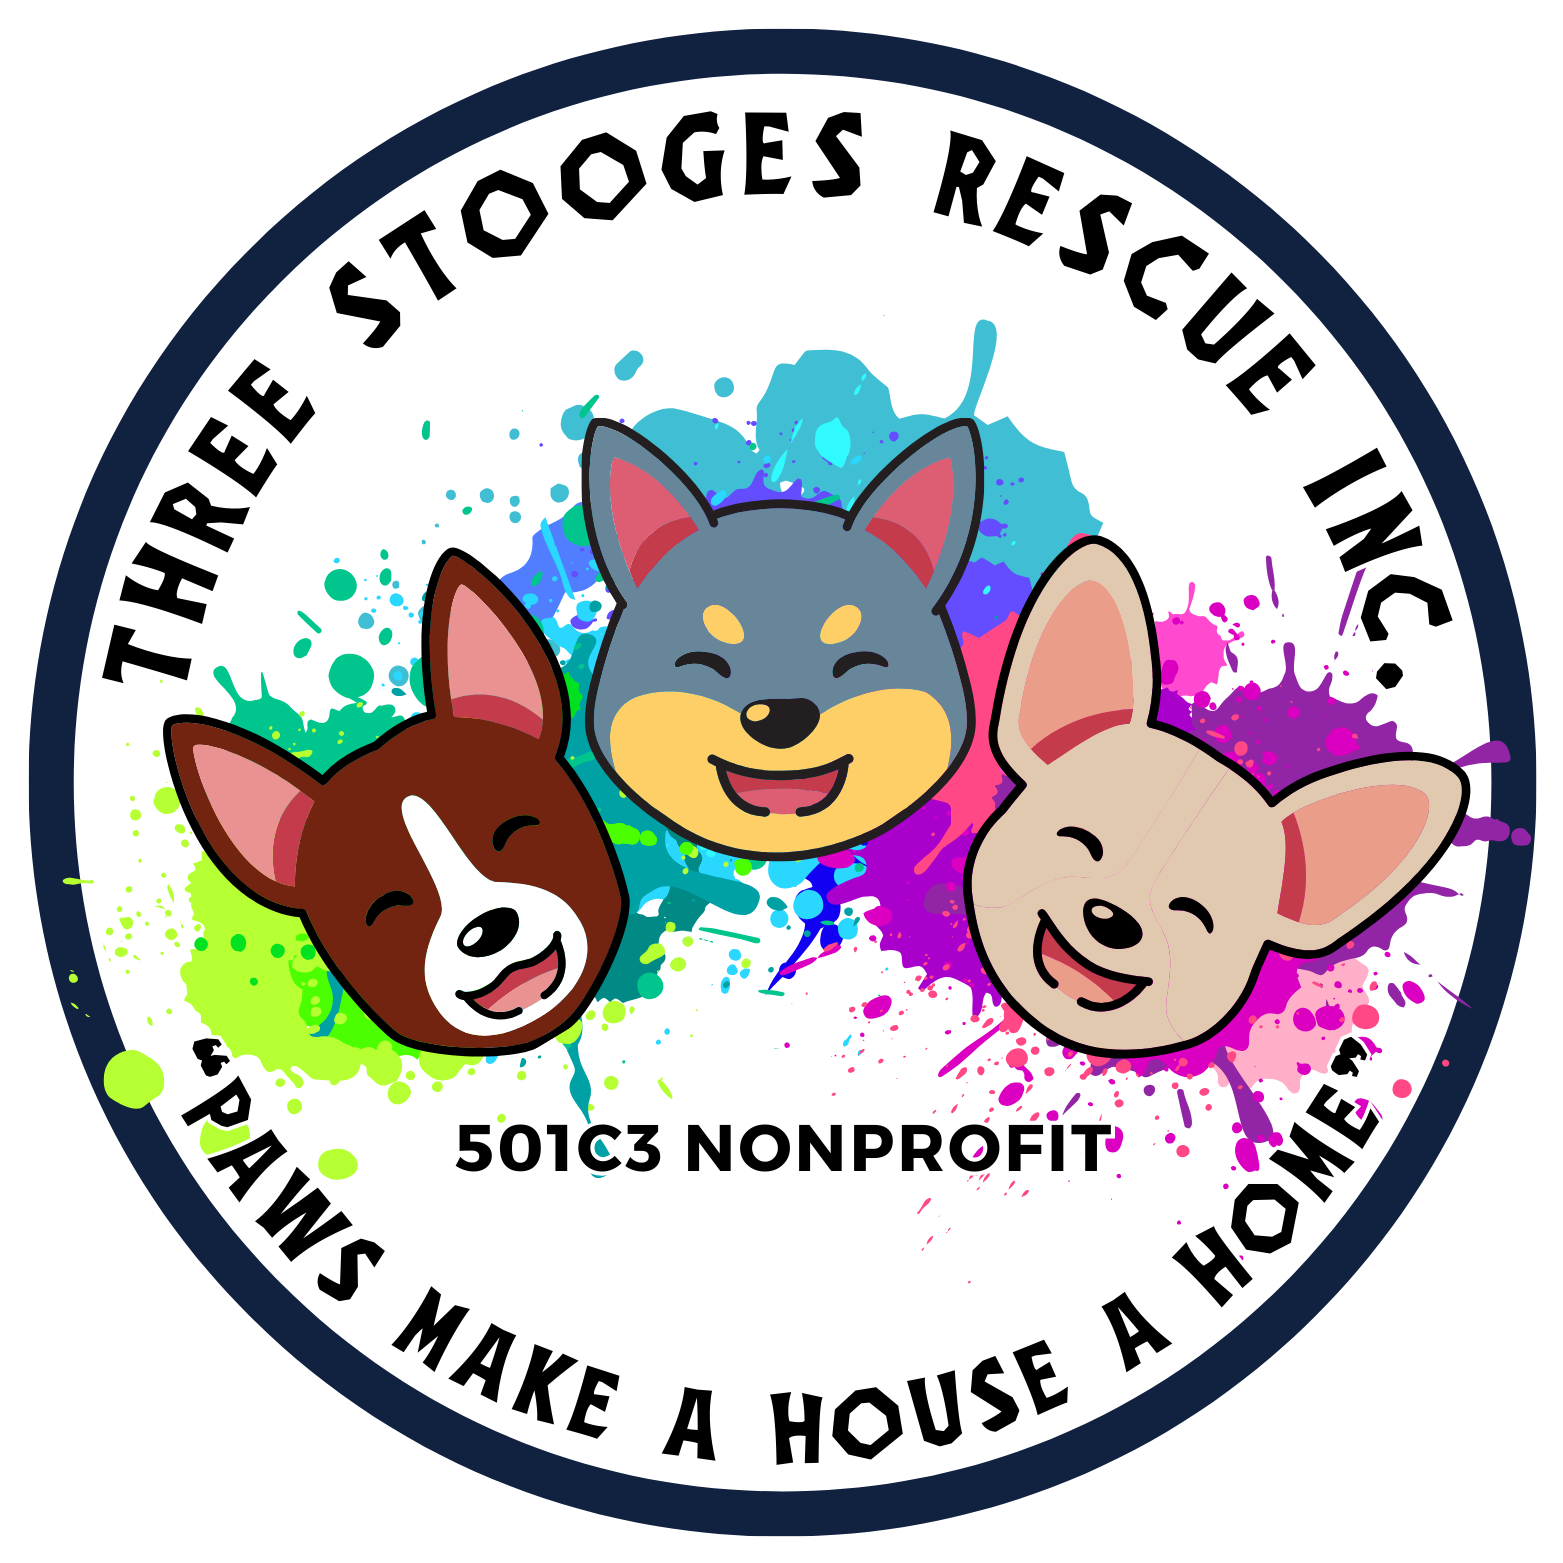 Three Stooges Rescue Inc.